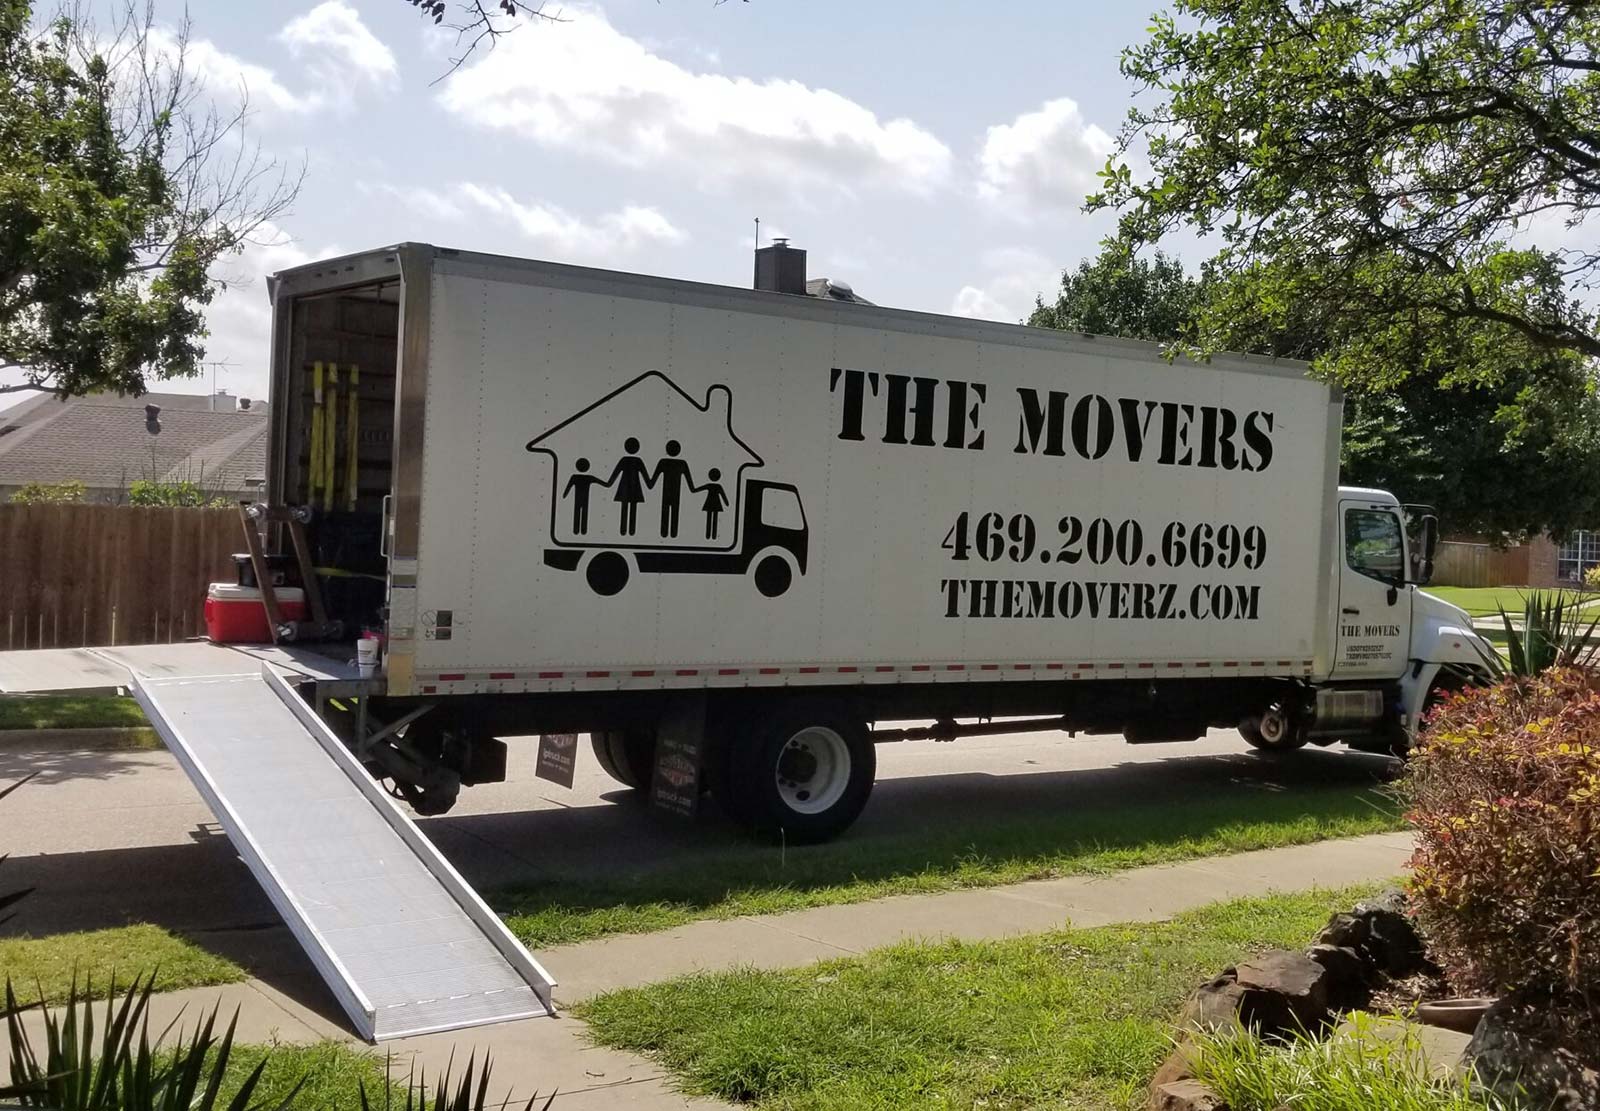 Our friendly Frisco movers helping our north Texas resident move into their new house in Frisco, Texas.